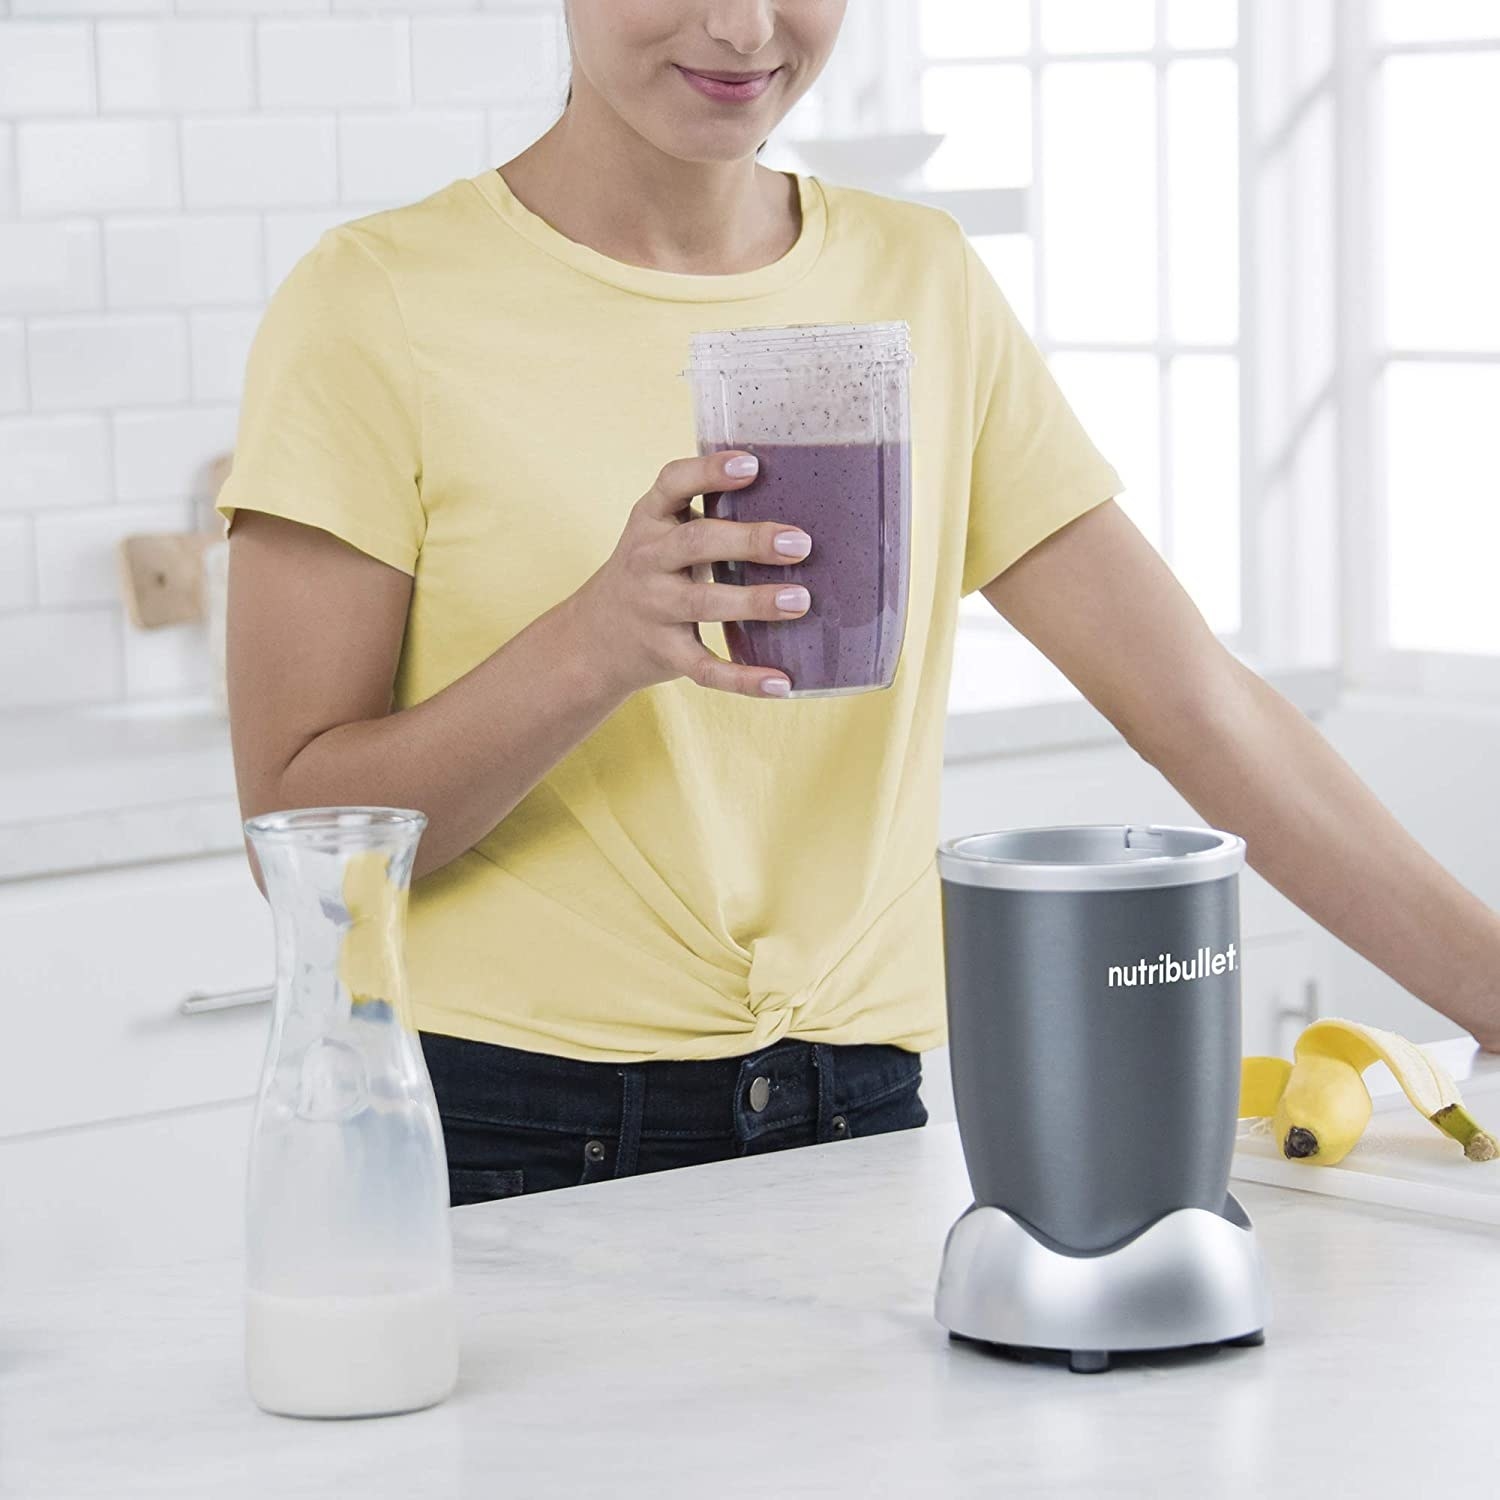 A model drinking a smoothie out of the NutriBullet cup 